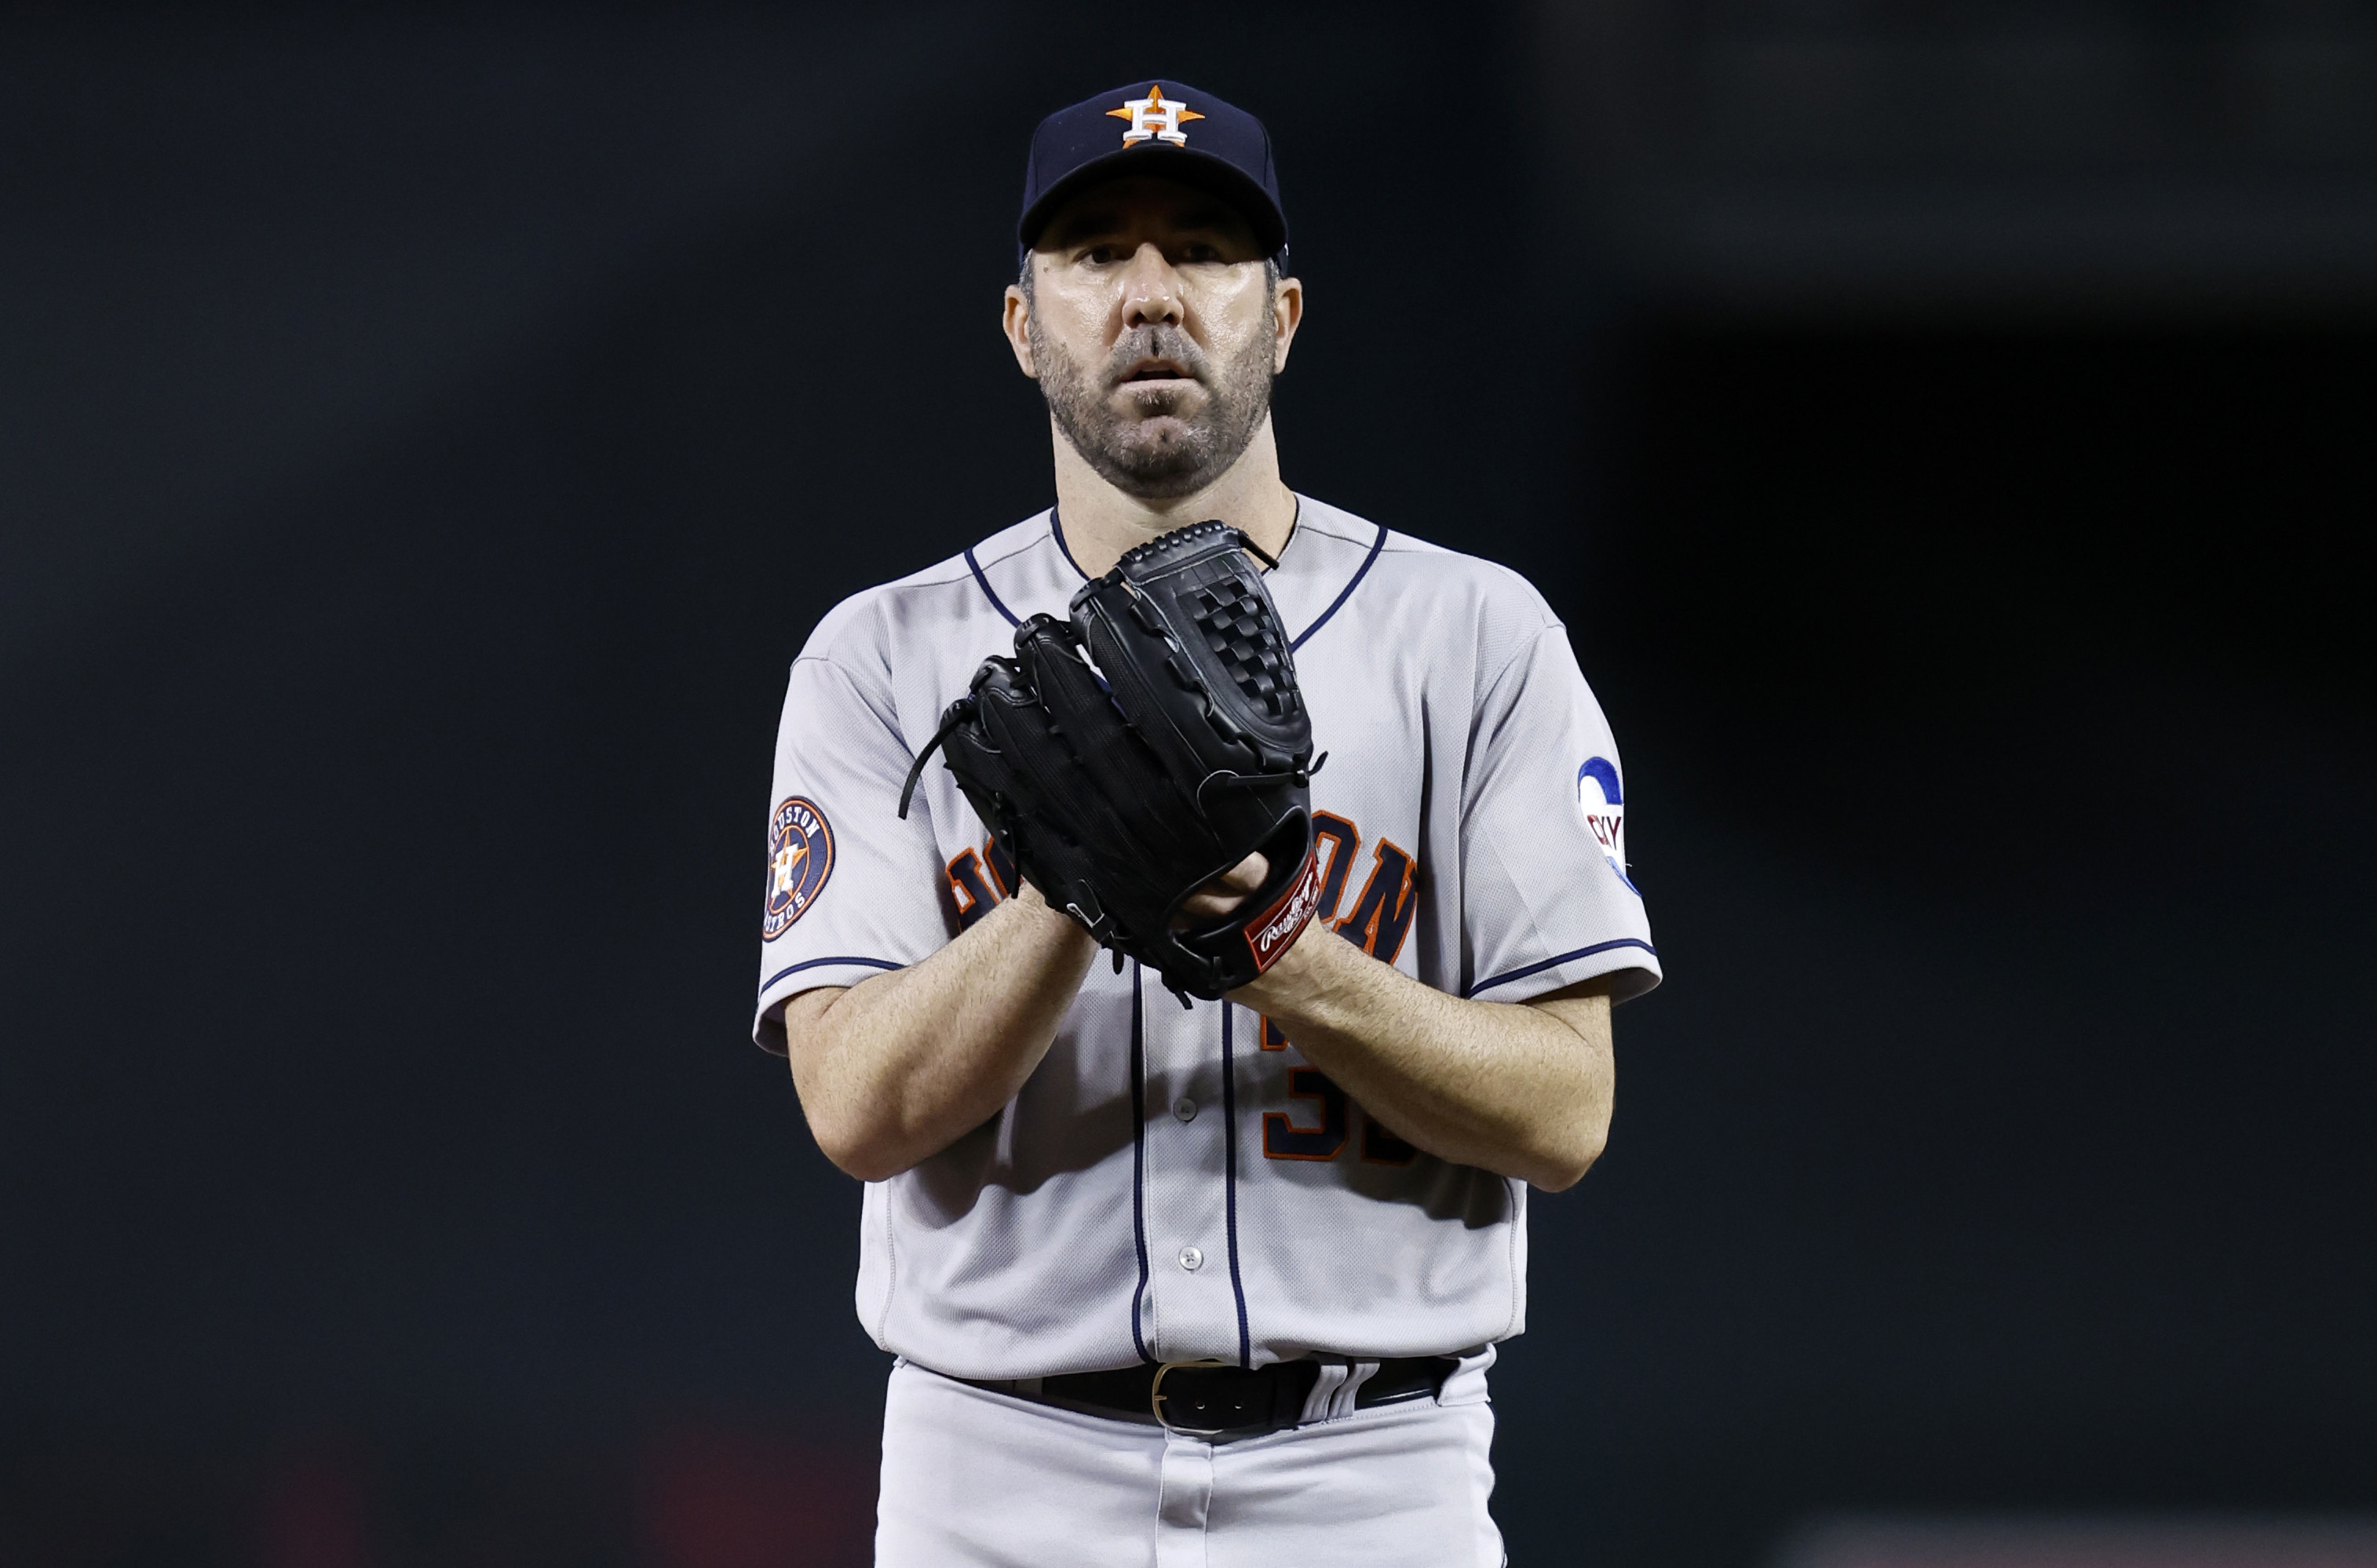 Baker takes over scam-marred Astros, set for 'last hurrah' - The